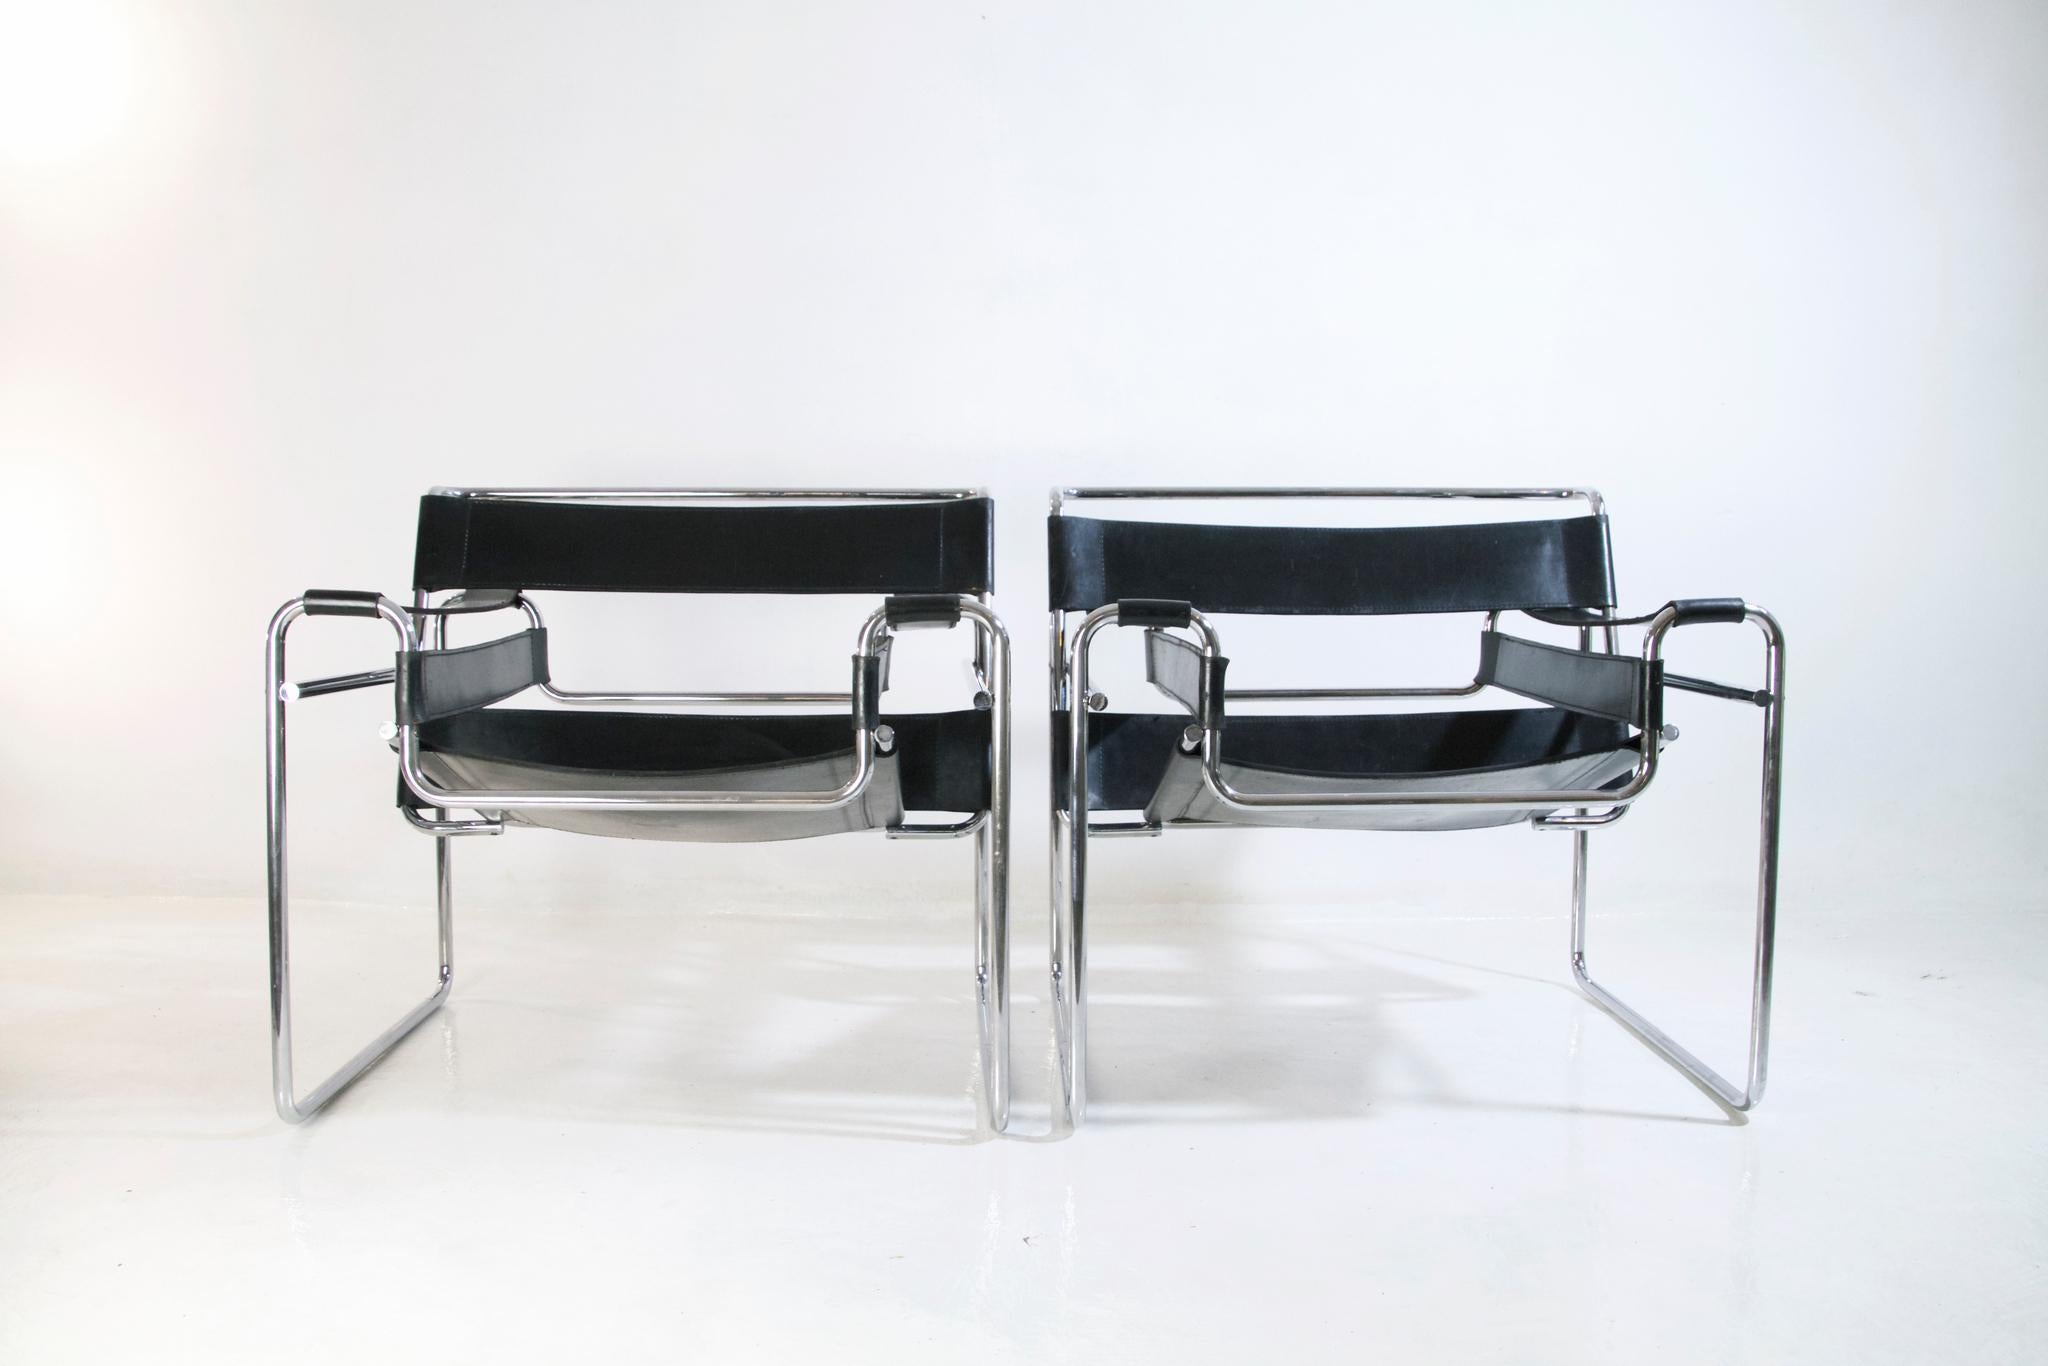 A pair of Wassily chairs, also known as the B3 Chair, designed by Marcel Breuer in 1925 while he was working at the Bauhaus. These chairs comes from the first original owners who bought them in Rome, Italy in the 1960's. High quality leather which